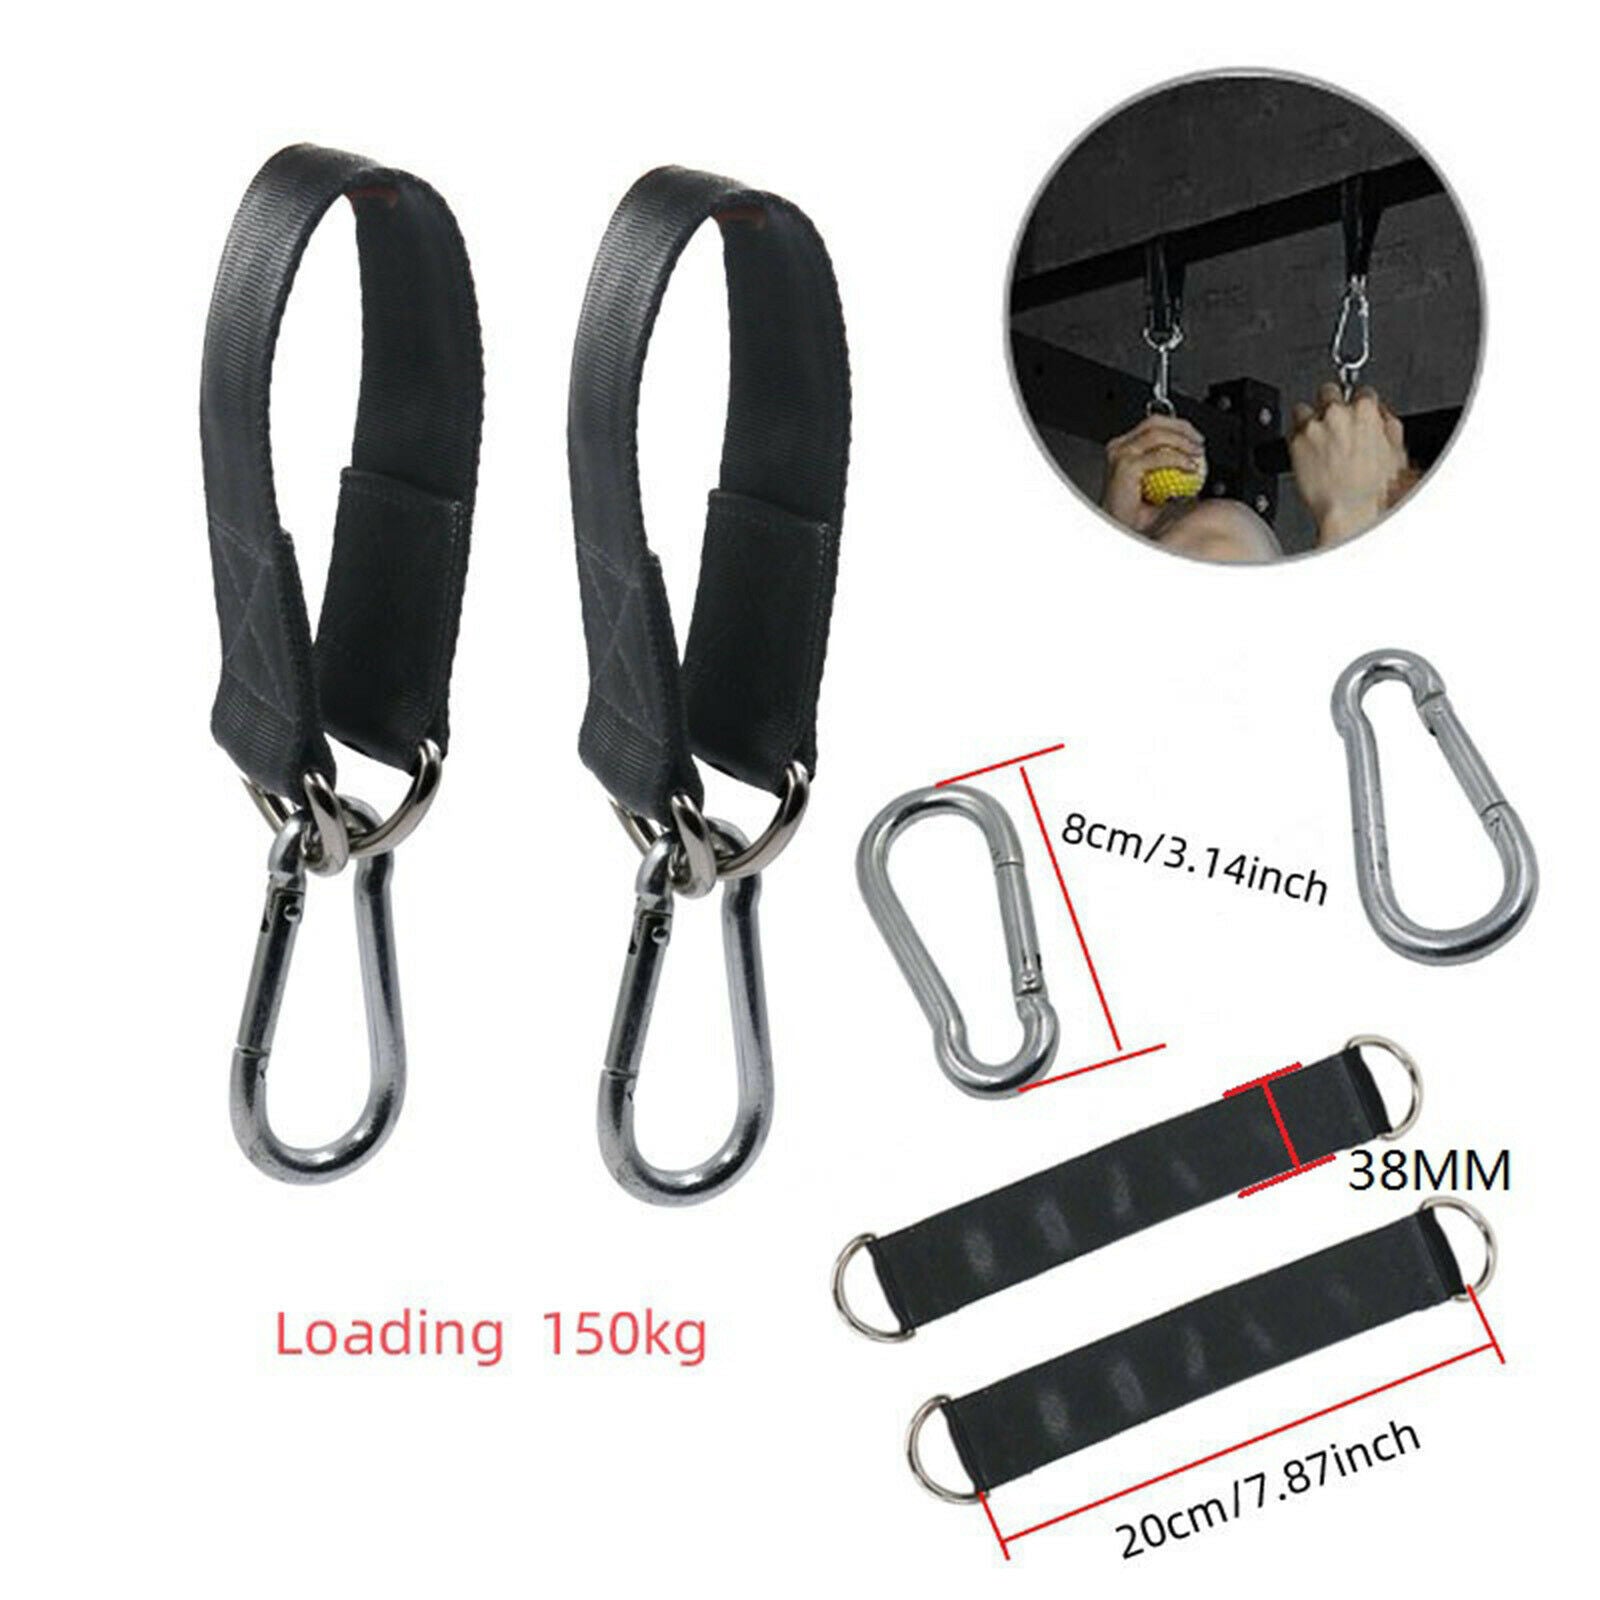 150 Kg Hanging Straps Kit for Swings Gym Hanging Straps with D- Hooks